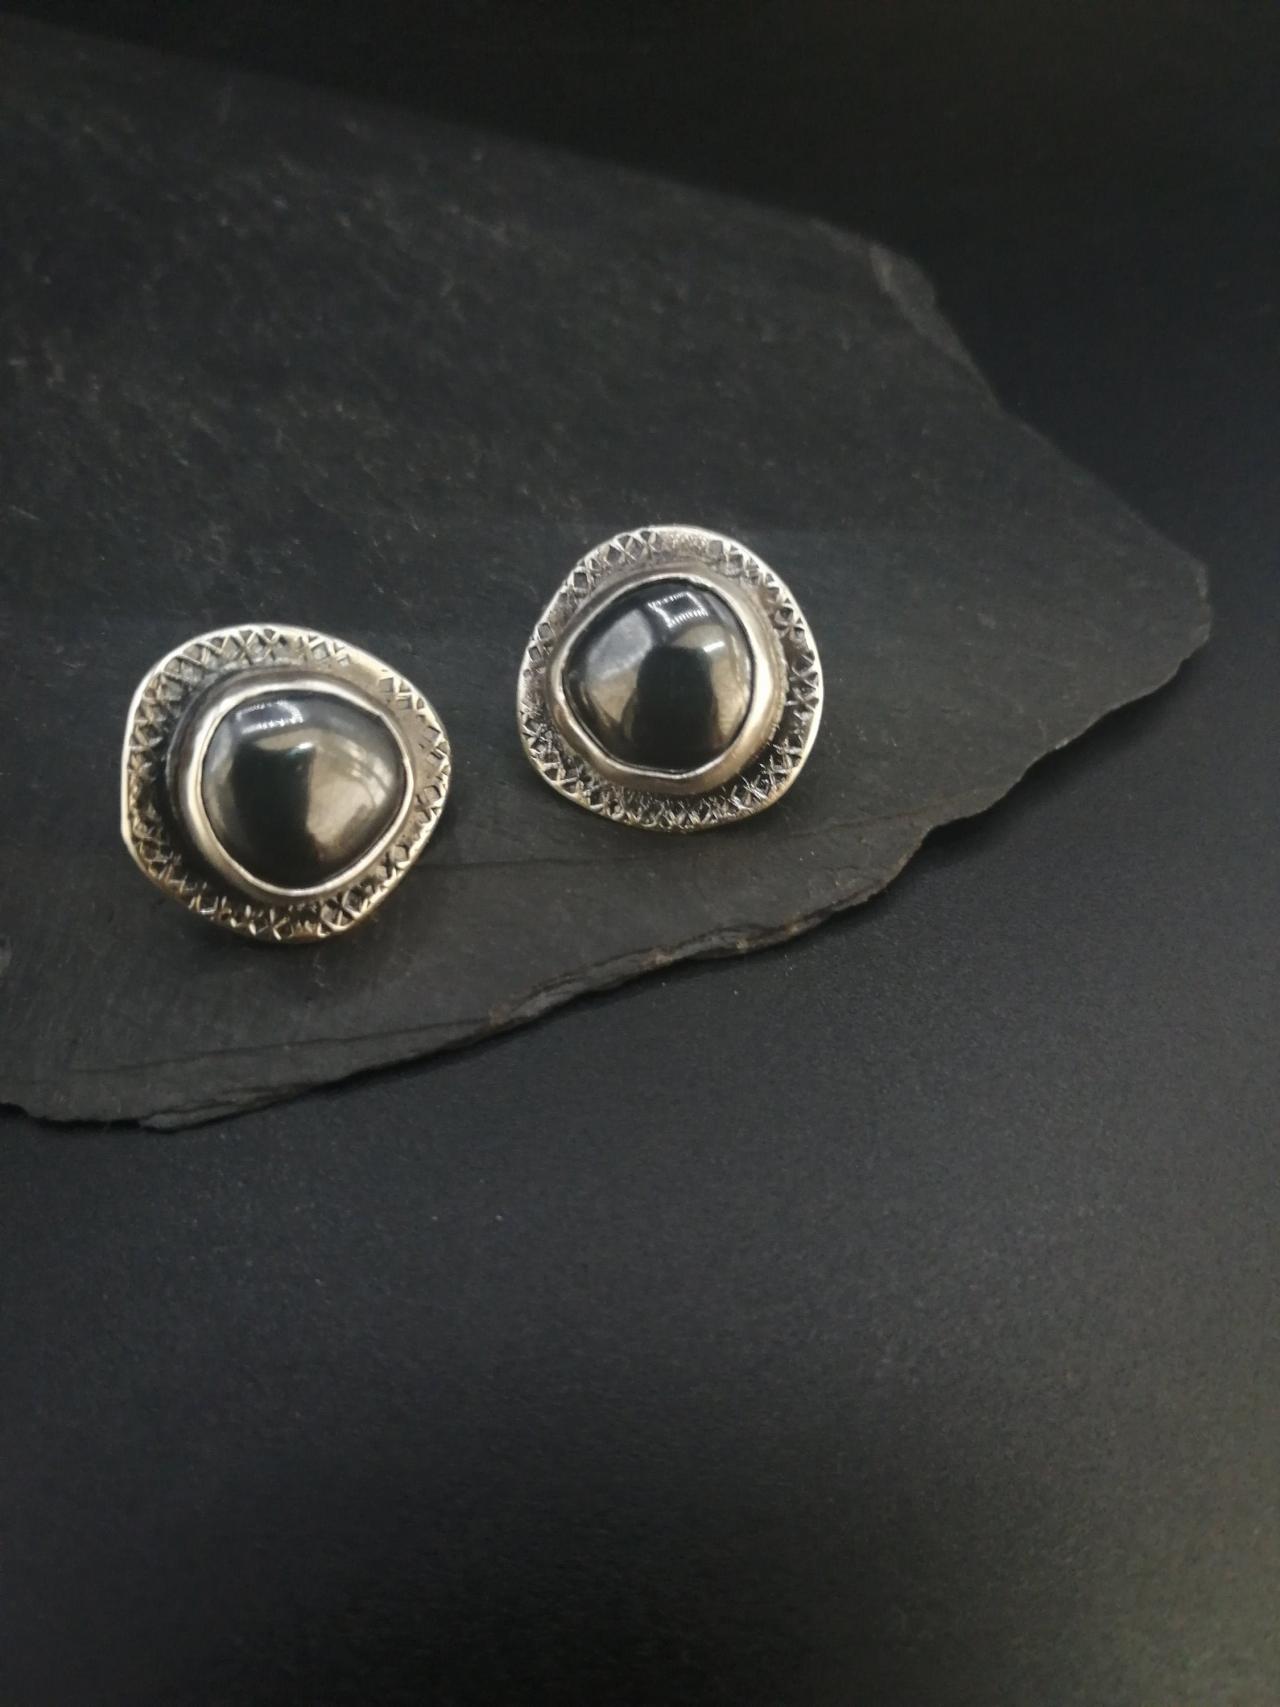 Textured Silver And Pyrite Gemstone Stud Earrings With Stamped Oxidize Pattern Light And Dark Designer Jewelry Simple Yet Unique Wabi Sabi